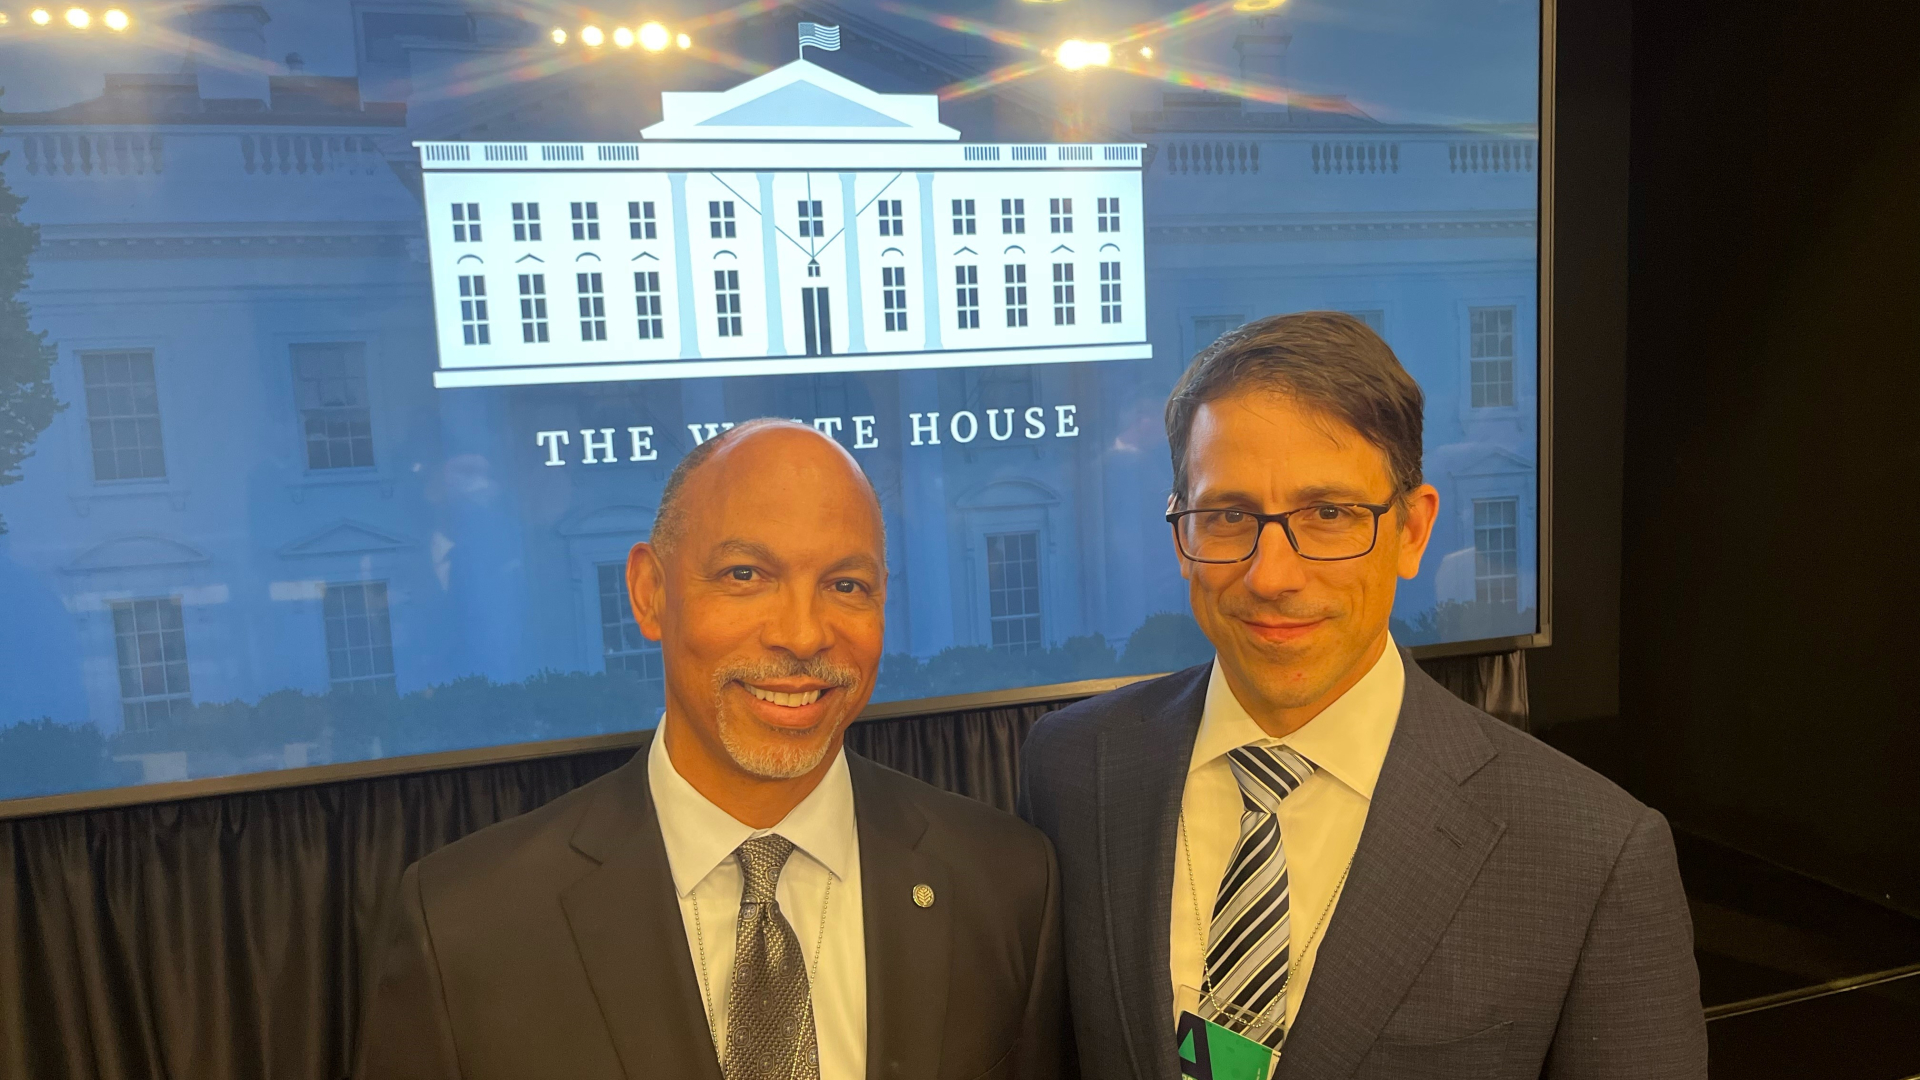 Gene Woods and Dr. David Callaway visit the White House